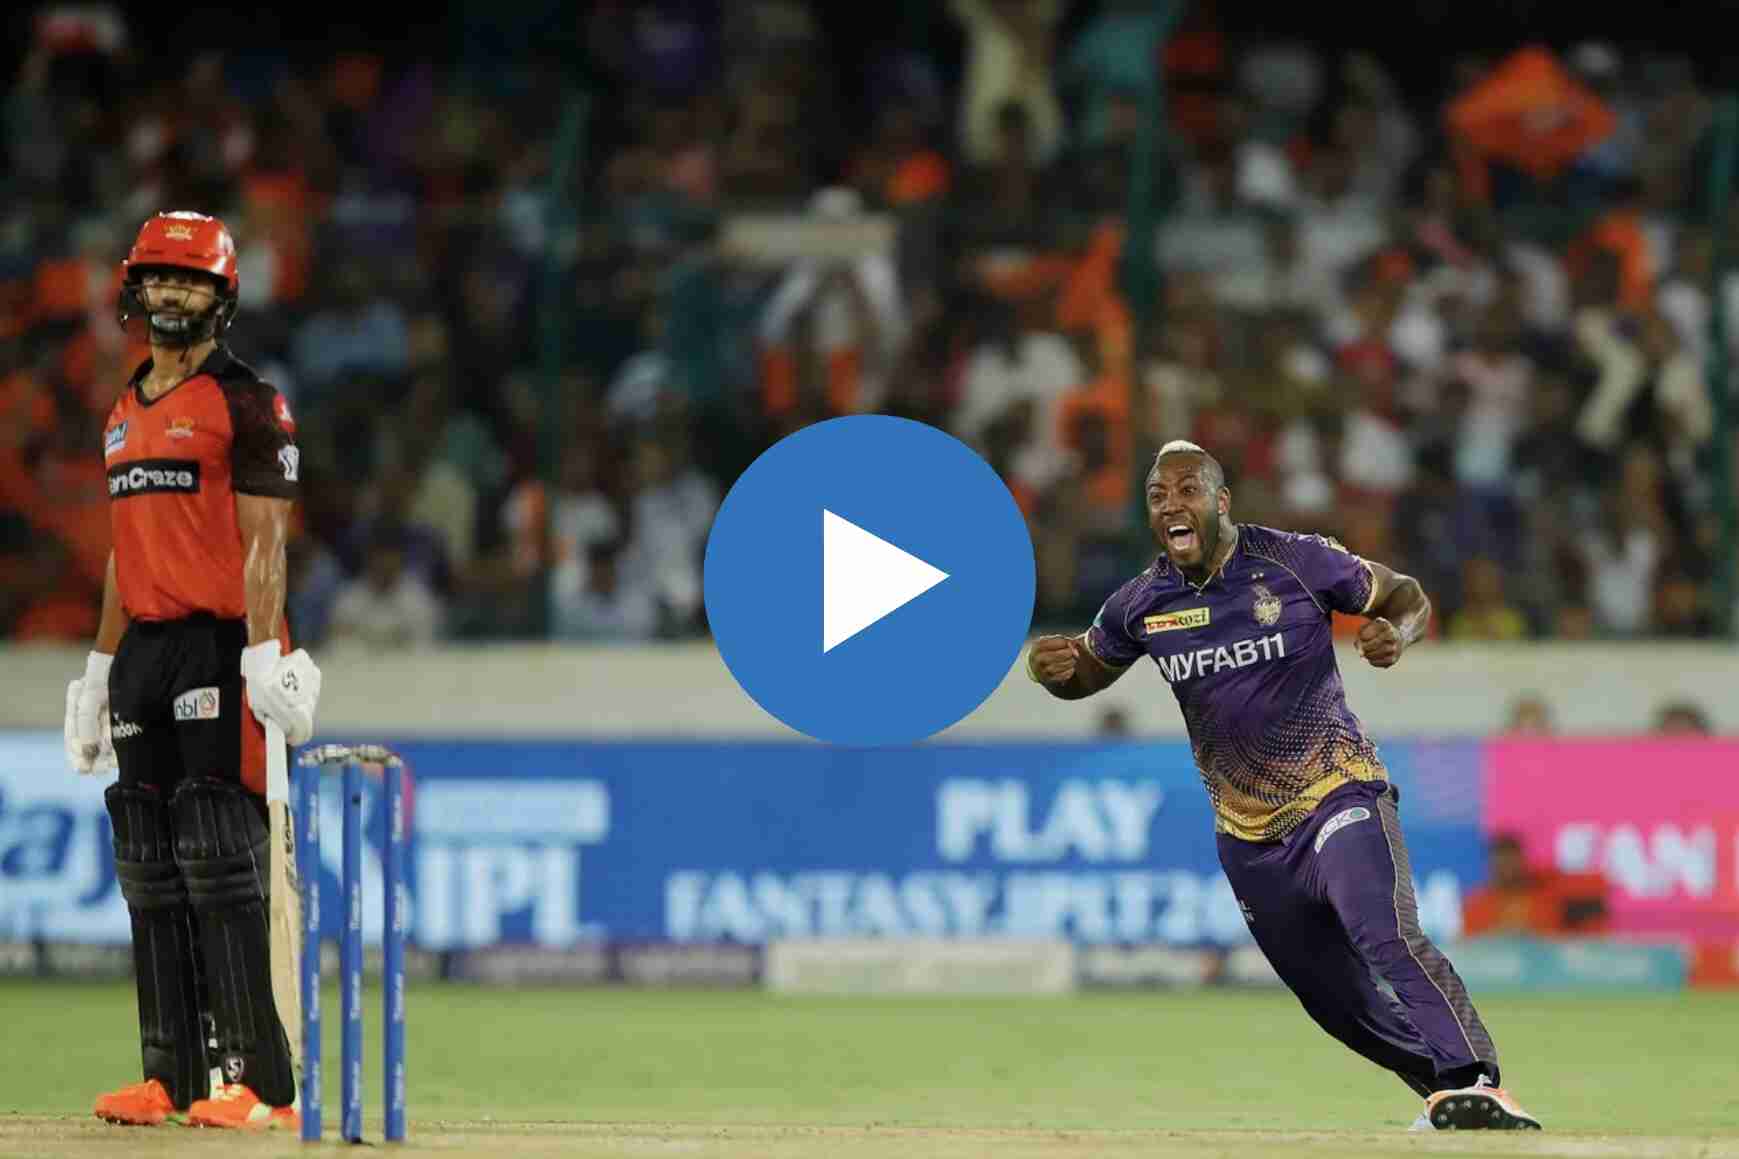 [Watch] Andre Russell Gives Tripathi an Animated Sendoff After Getting Hit for 4,6,4